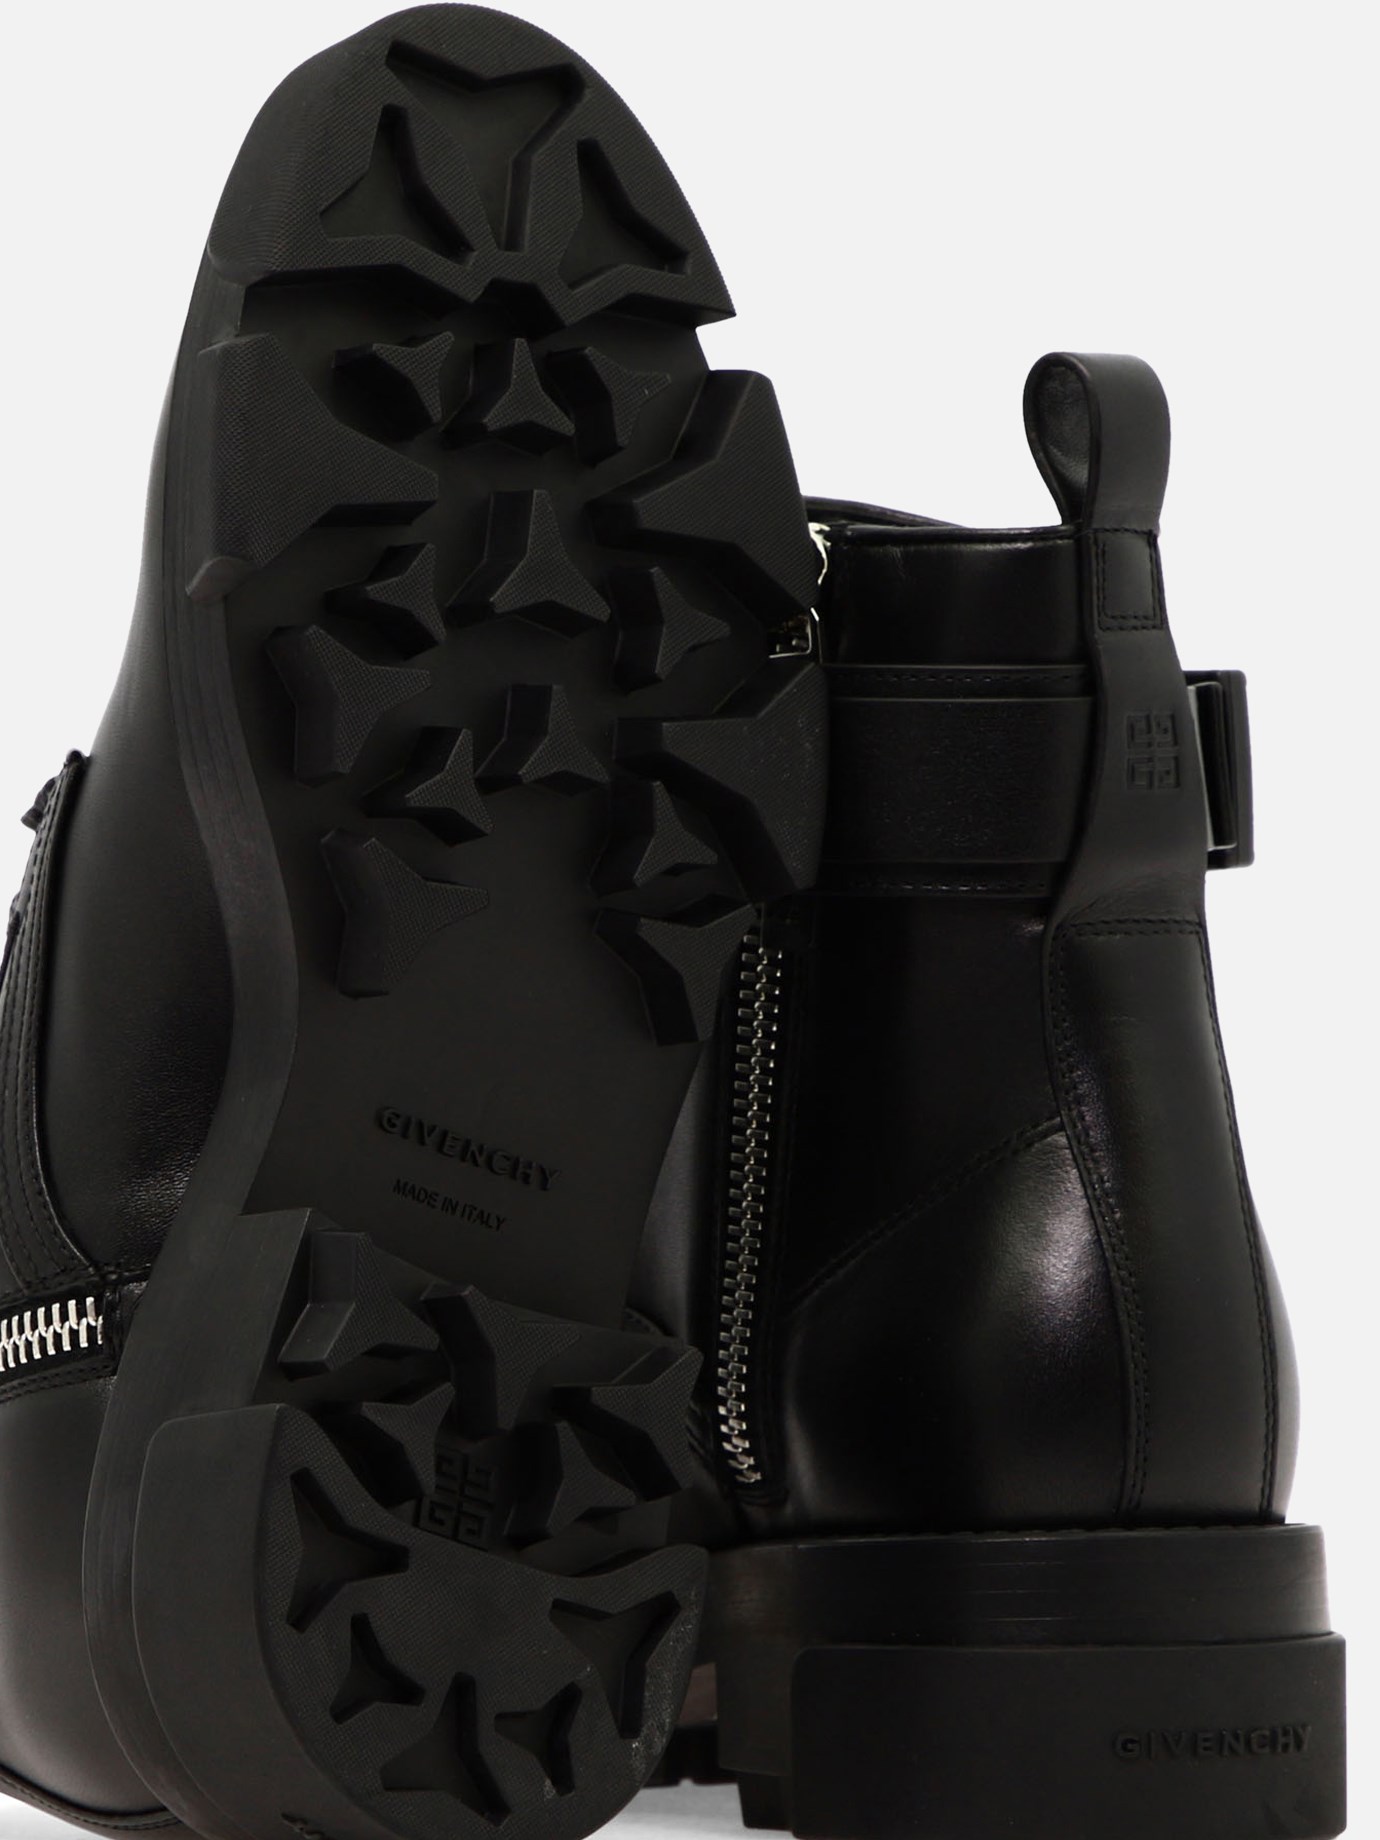  Combat  bootsby Givenchy - 4